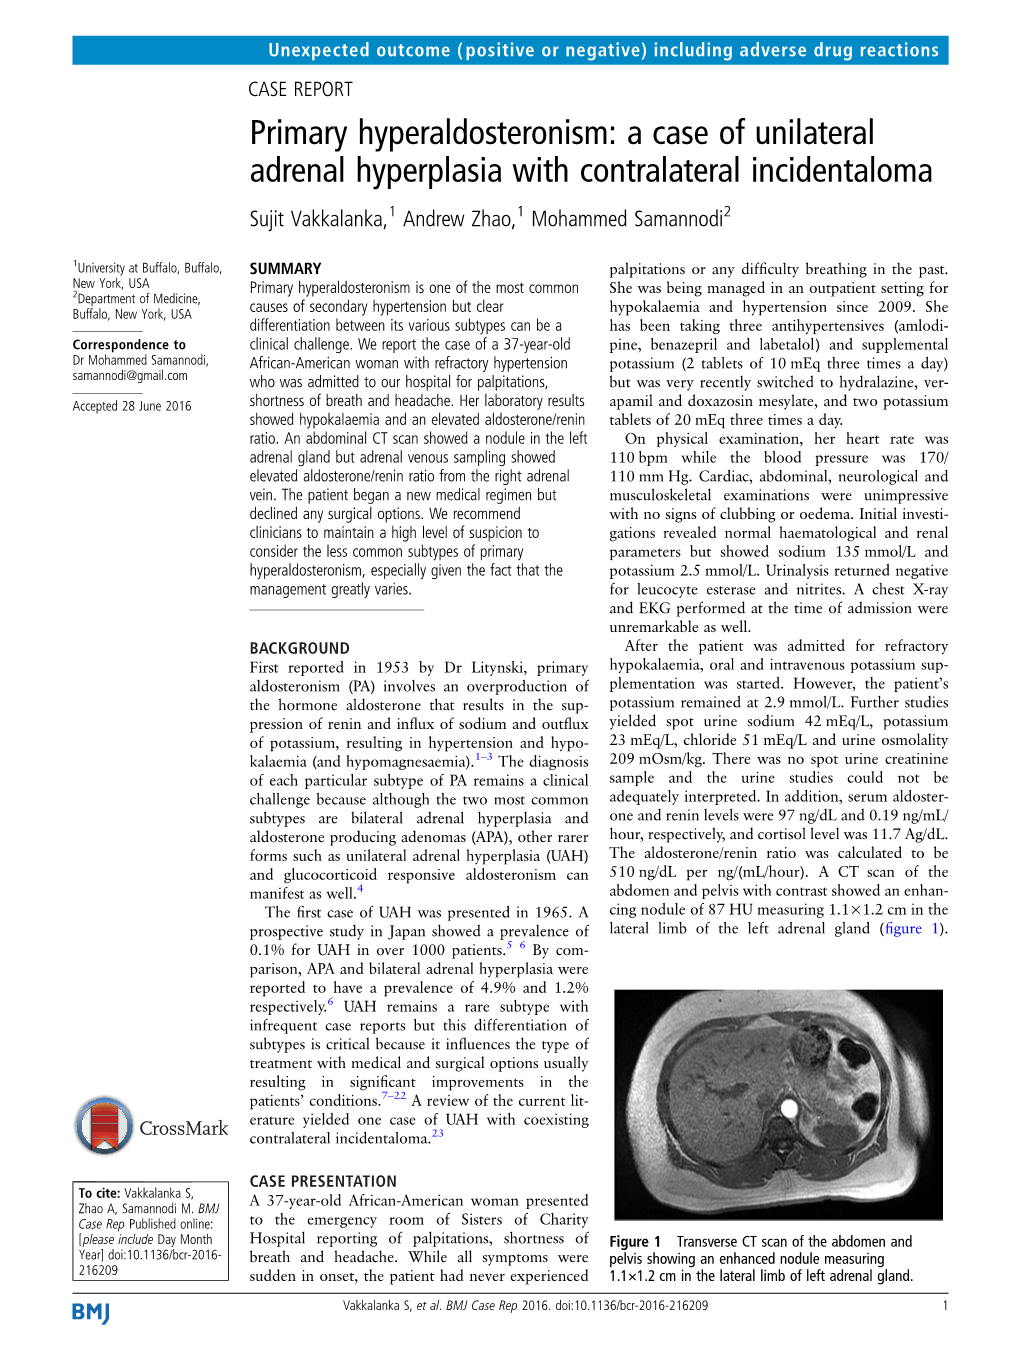 Primary Hyperaldosteronism: a Case of Unilateral Adrenal Hyperplasia with Contralateral Incidentaloma Sujit Vakkalanka,1 Andrew Zhao,1 Mohammed Samannodi2